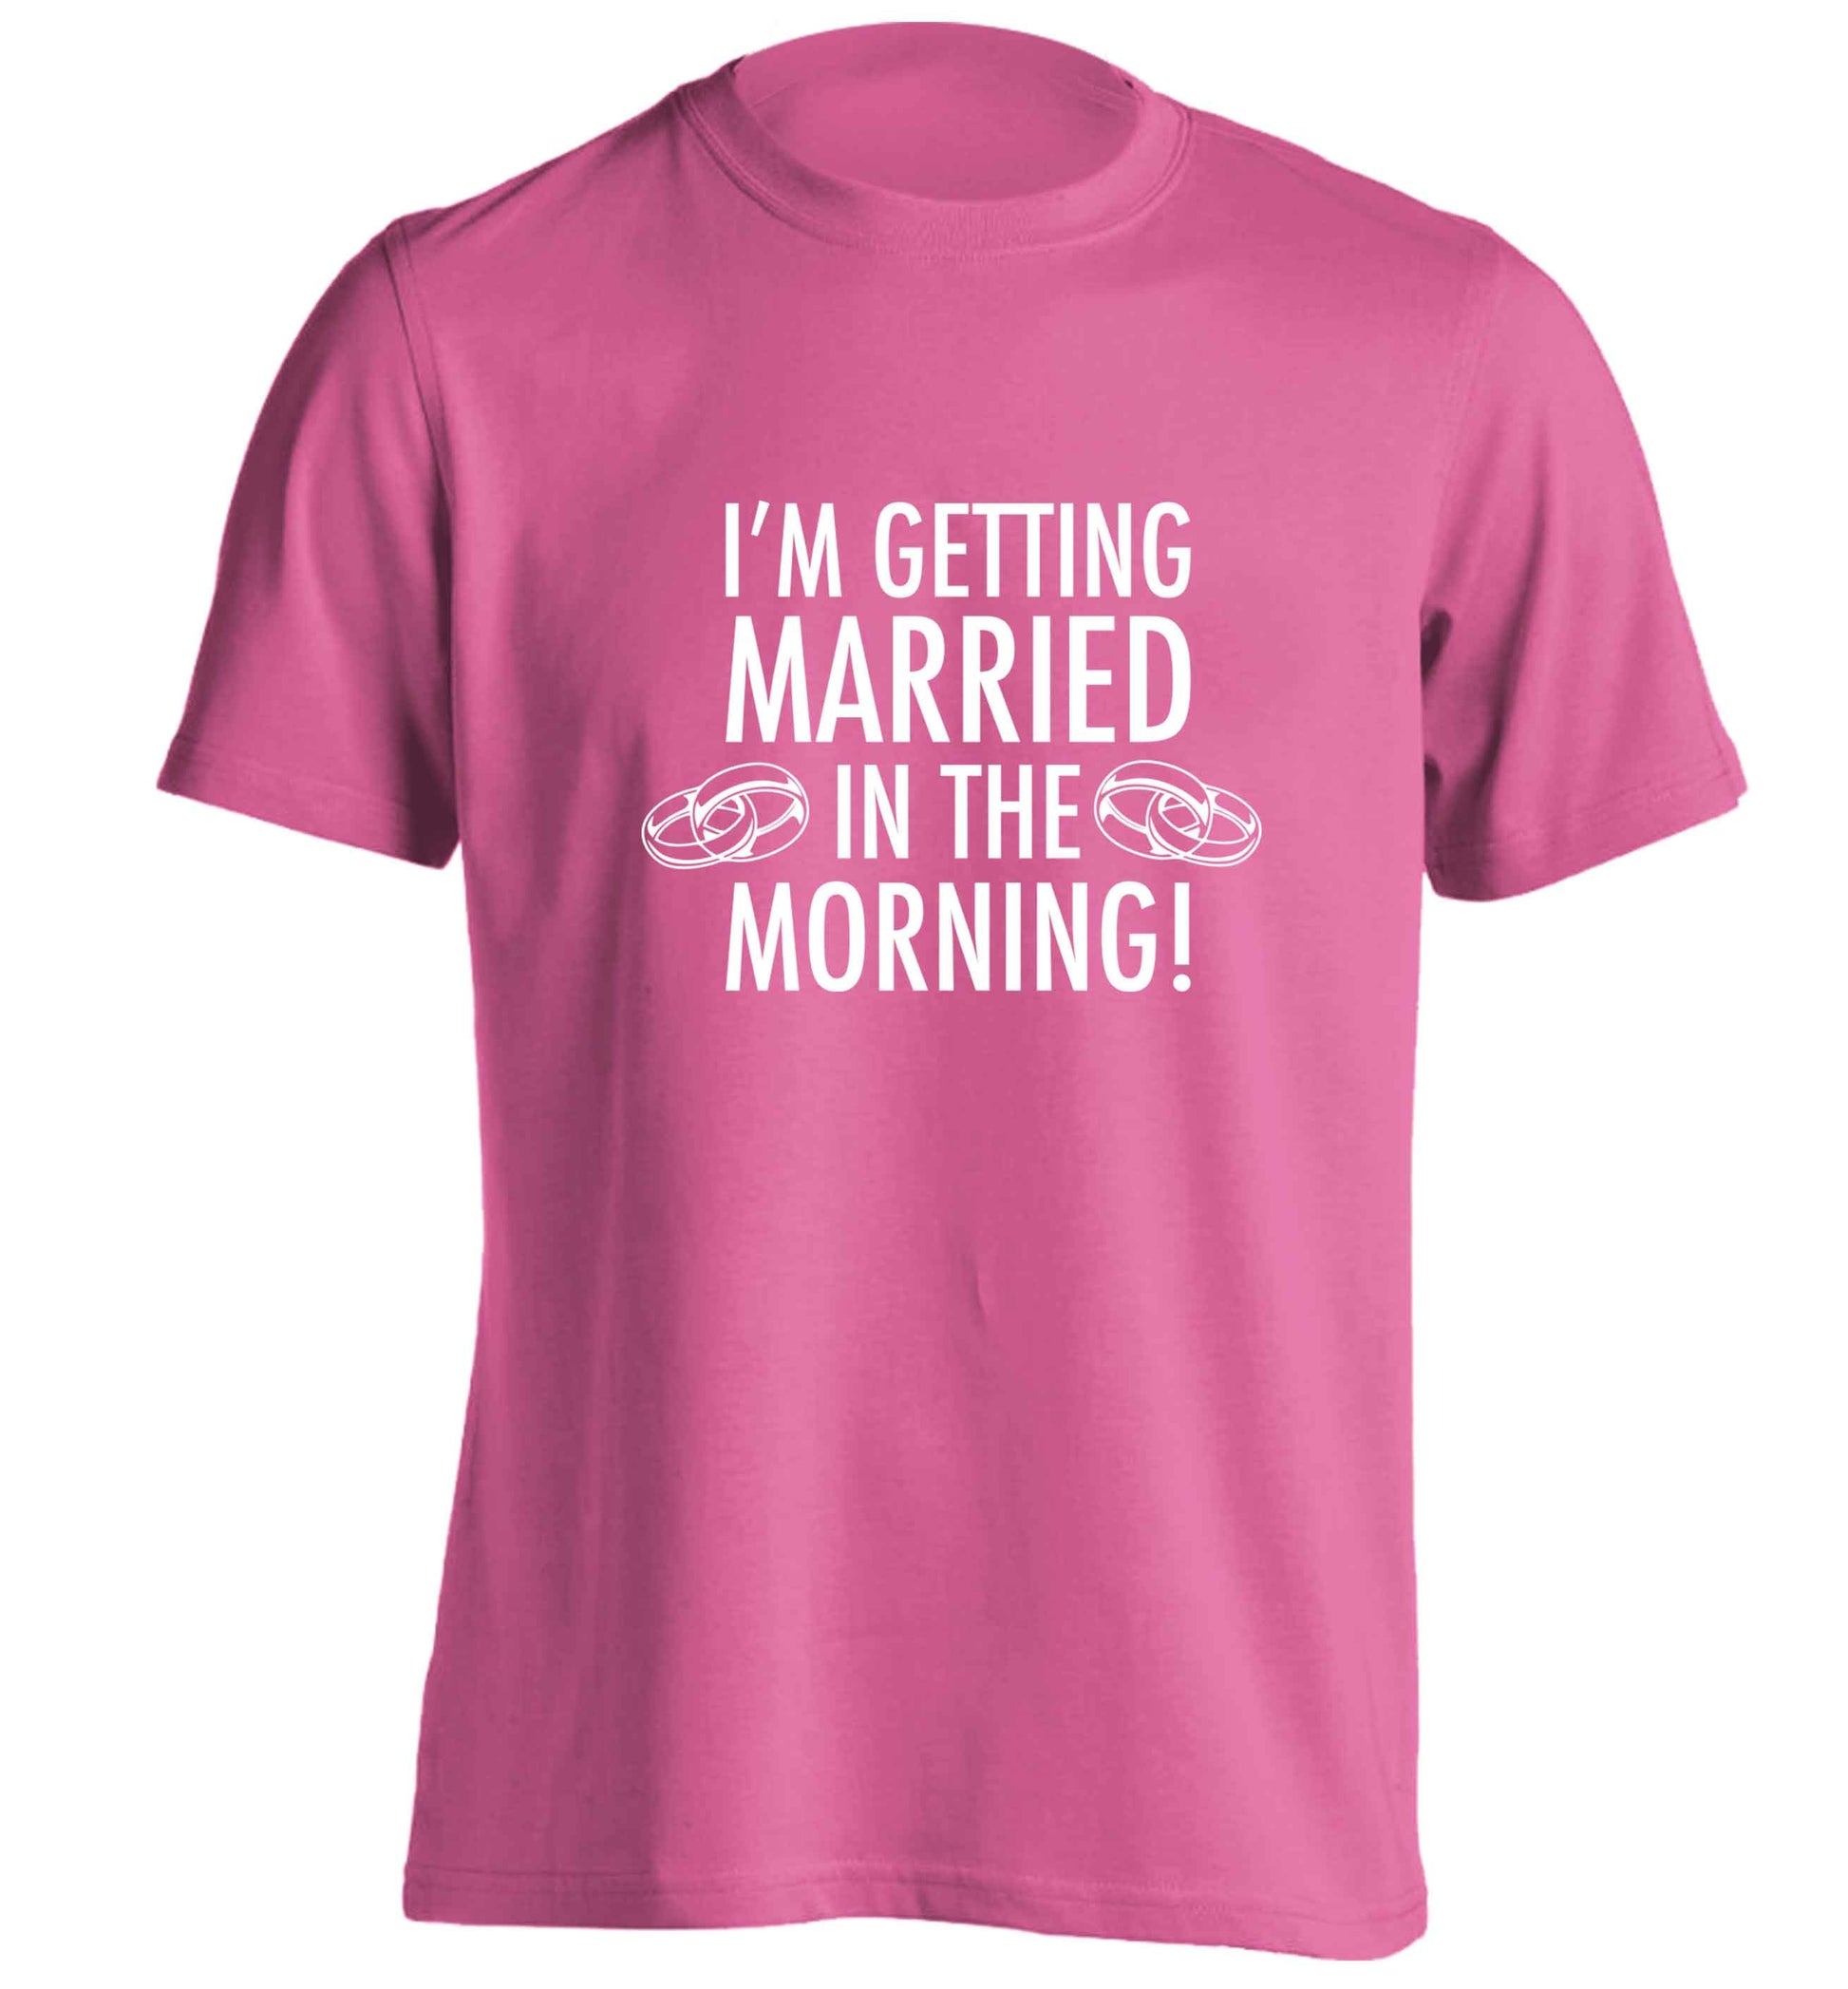 I'm getting married in the morning! adults unisex pink Tshirt 2XL